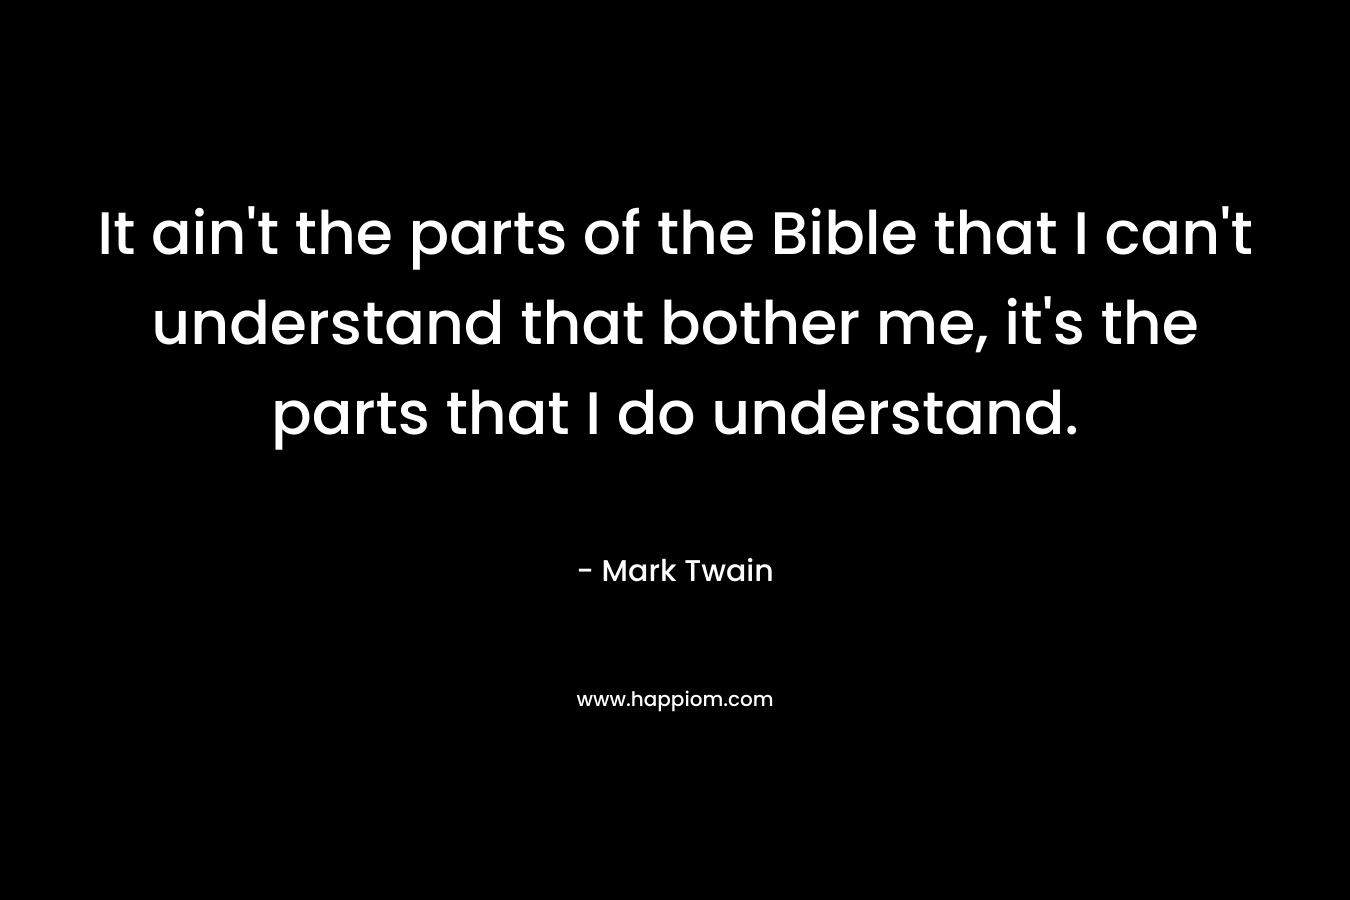 It ain't the parts of the Bible that I can't understand that bother me, it's the parts that I do understand.